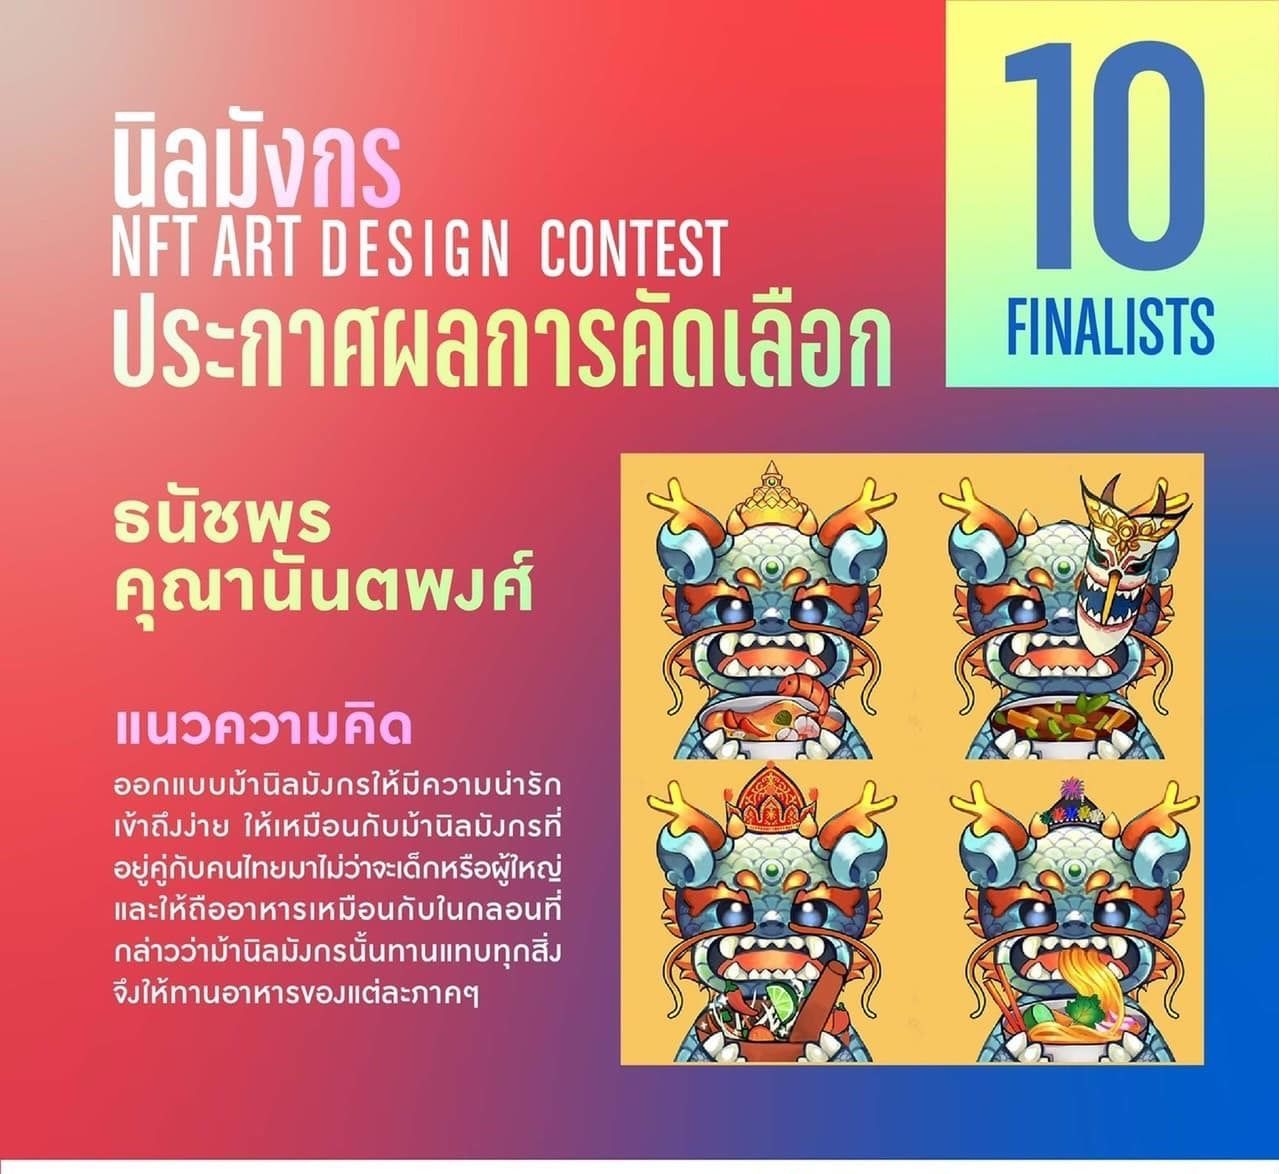 One of the 10 finalists in the NFT Art Design Contest awarded to another Siam IT student.